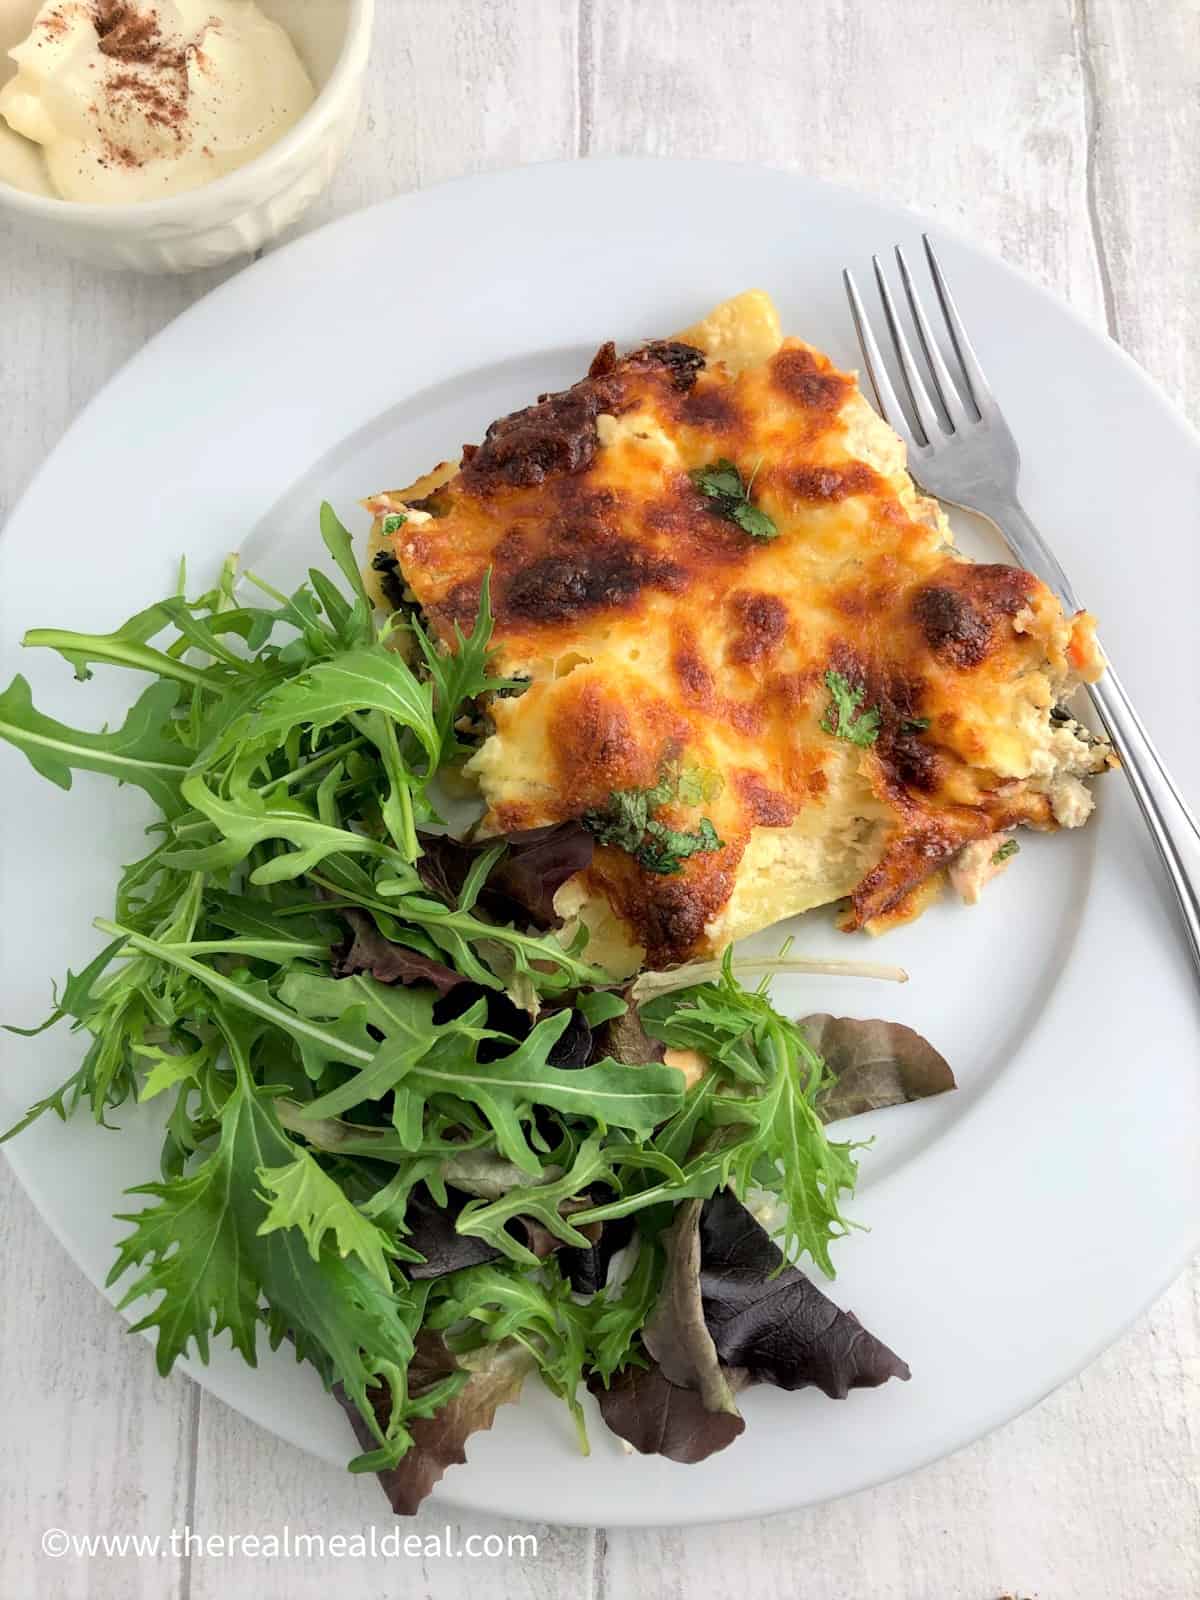 slice of salmon and spianch lasagne on plate with green salad